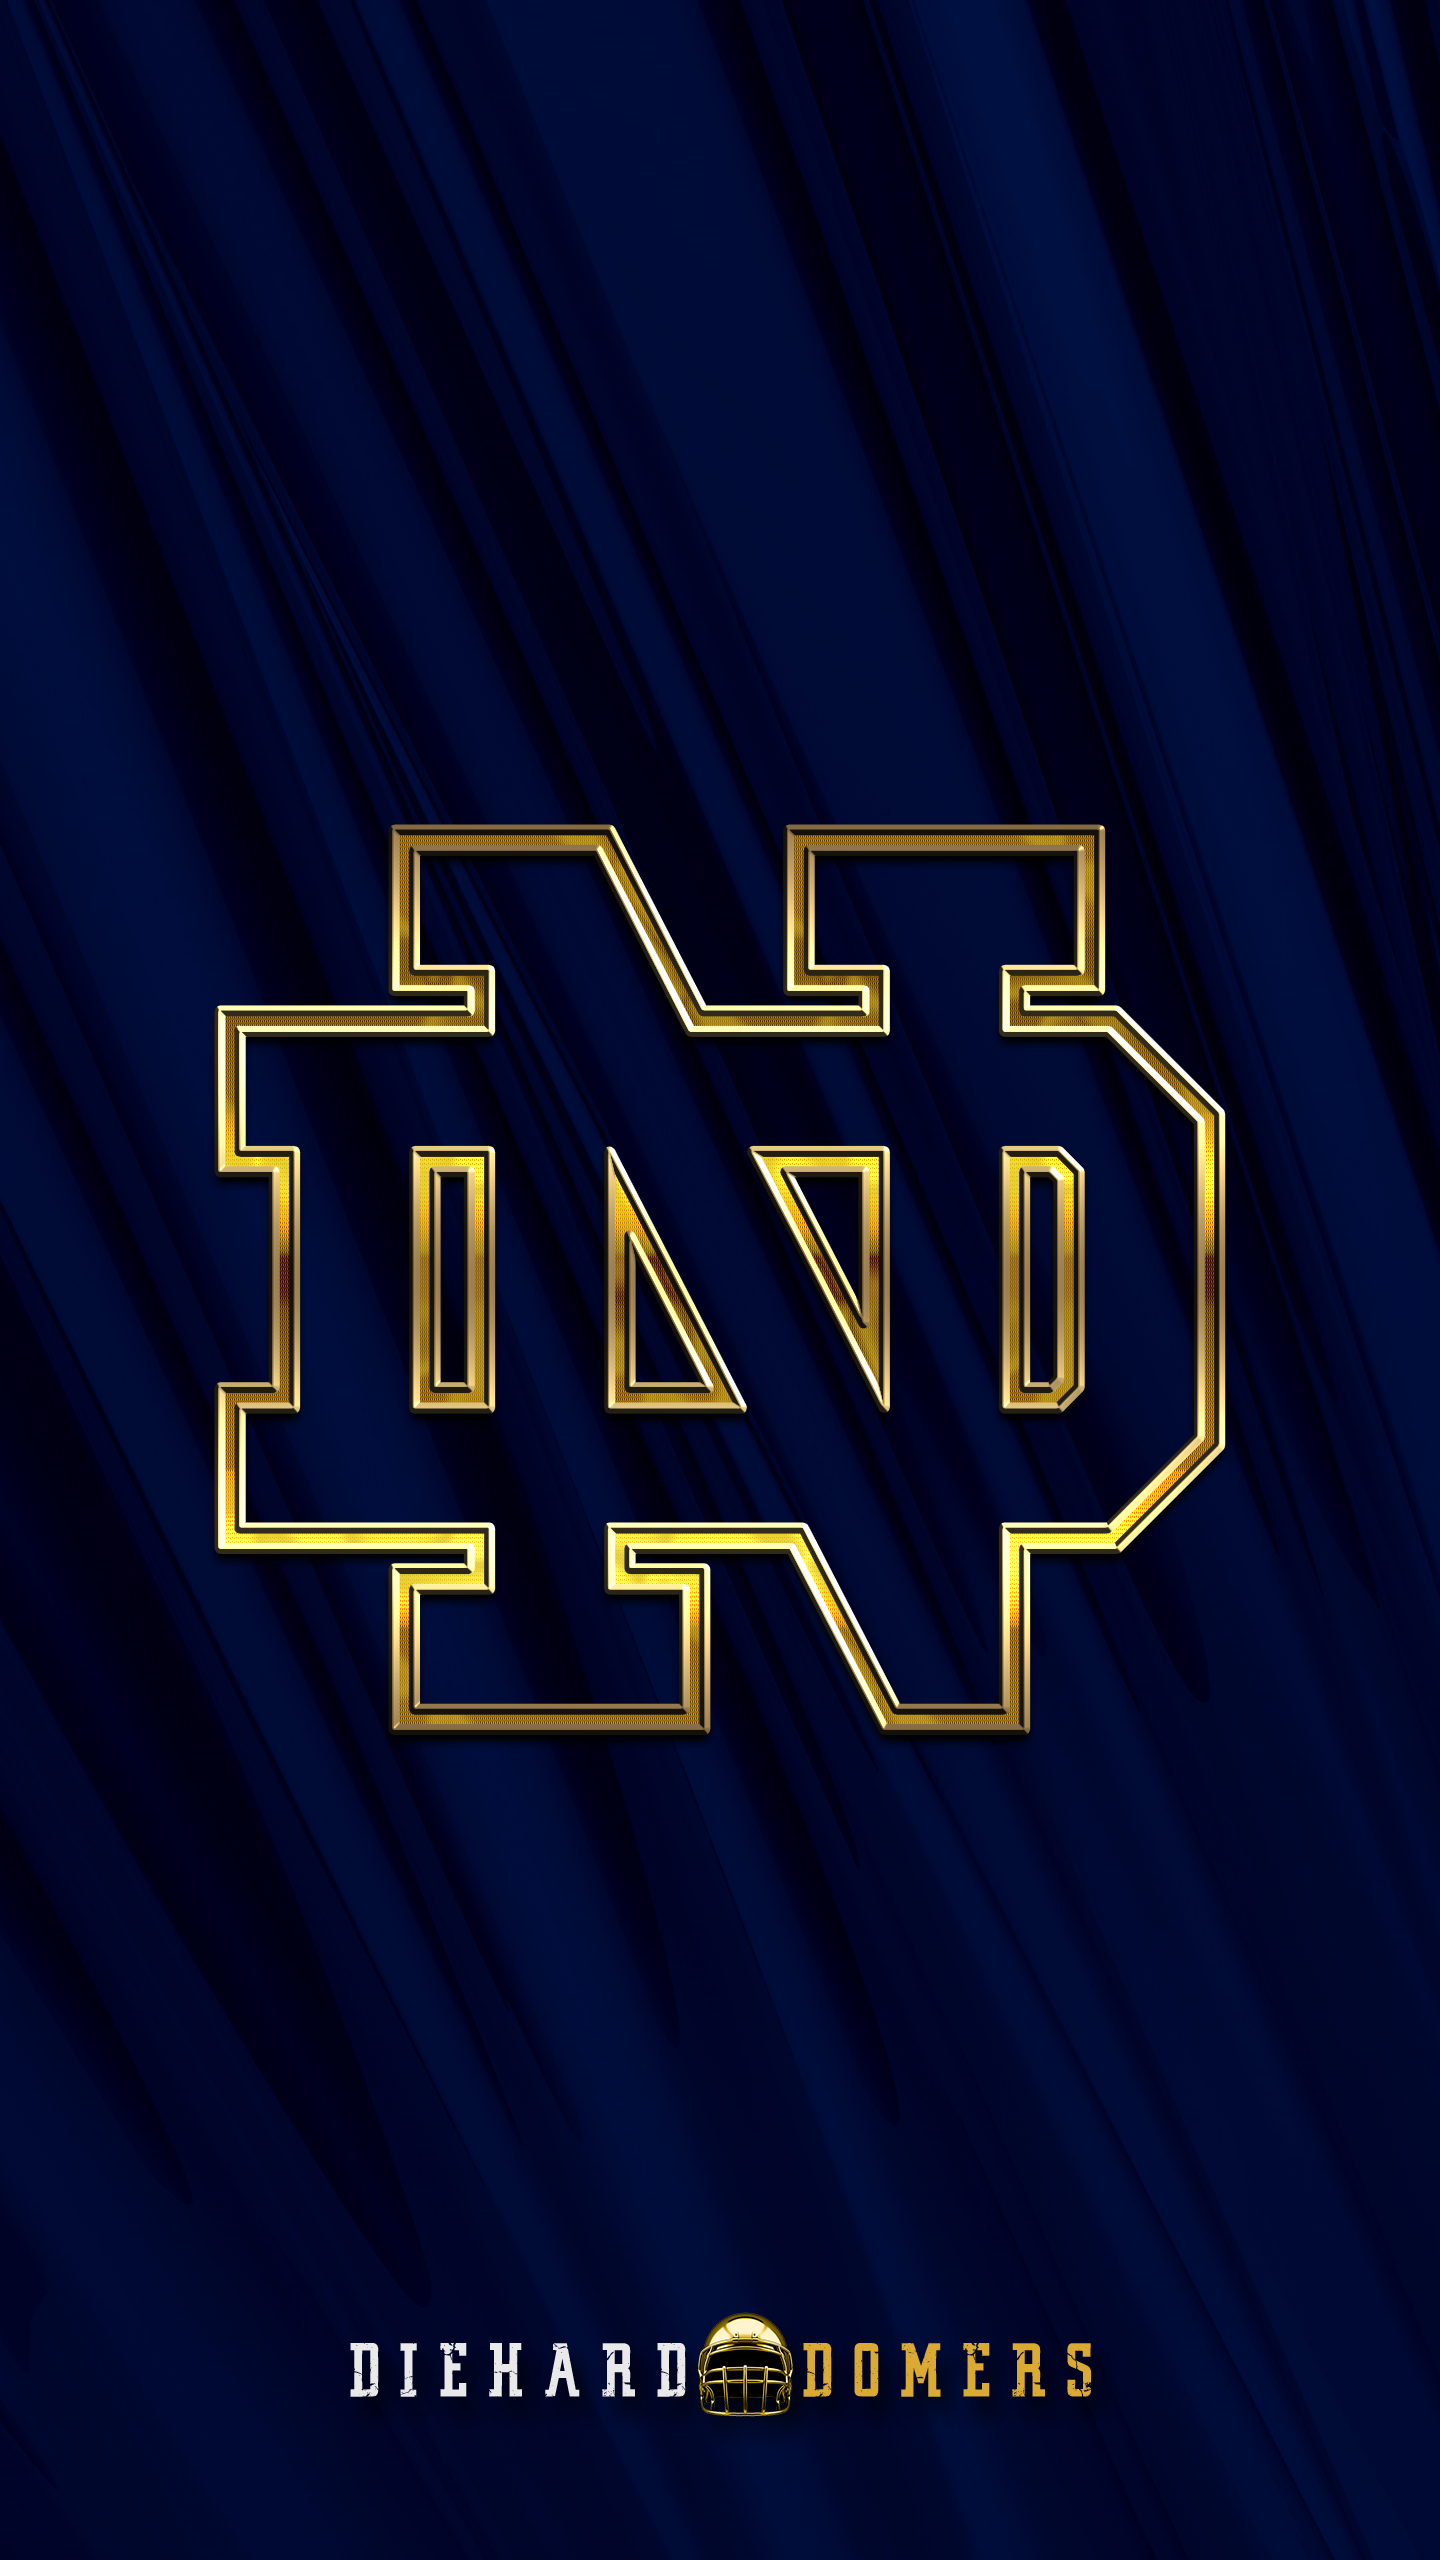 1440x2560 Notre Dame Football Wallpapers Top Free Notre Dame Football Backgrounds